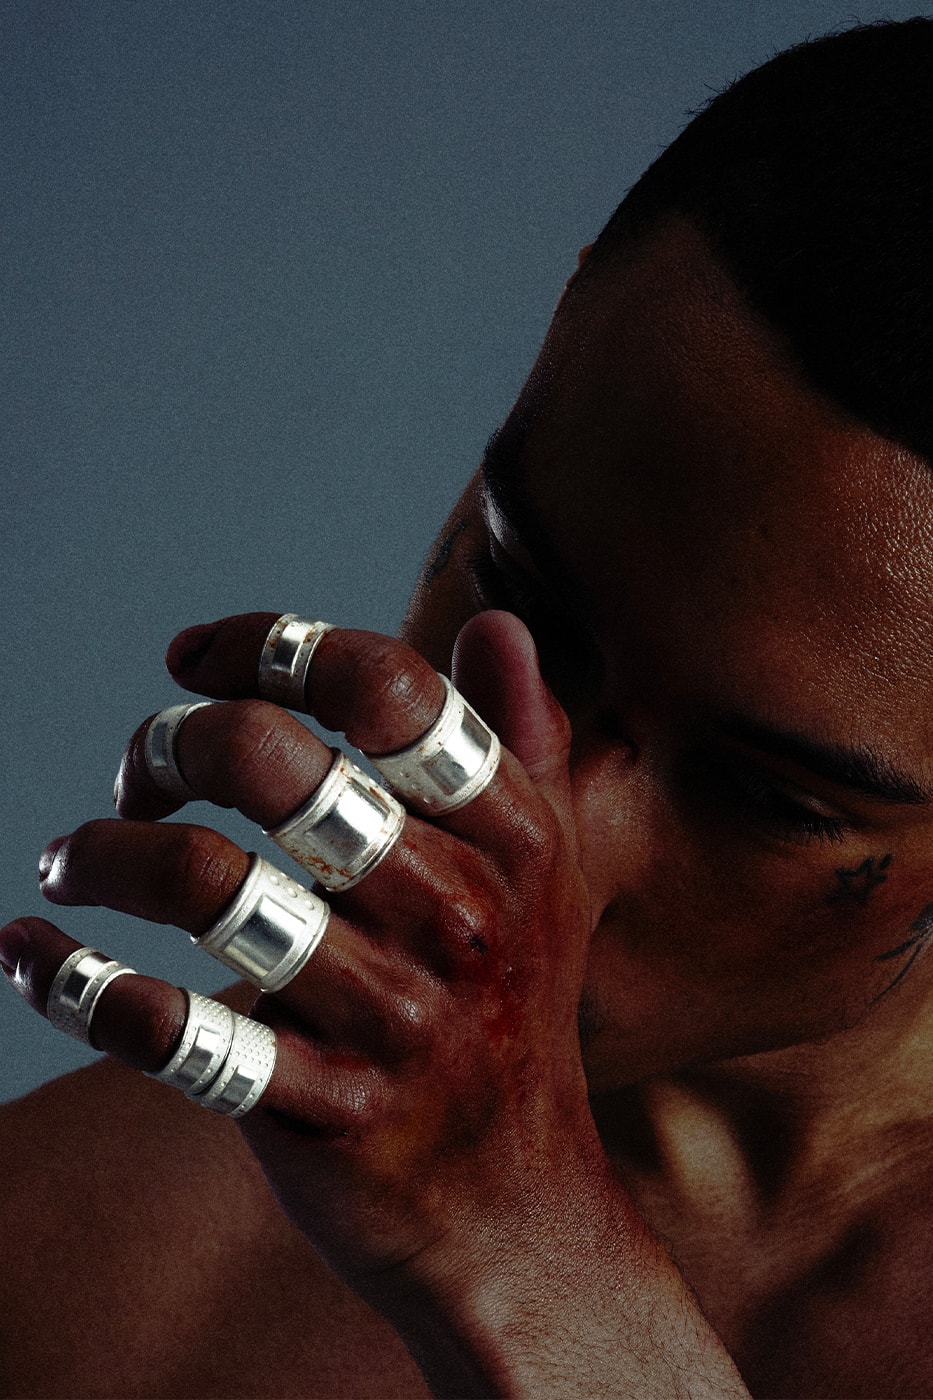 Domenico Formichetti's PDF Releases the "BEND" Silver Ring inspired by one ring dark lord sauron lord of the rings 925 sterling silver accessories jewelry 